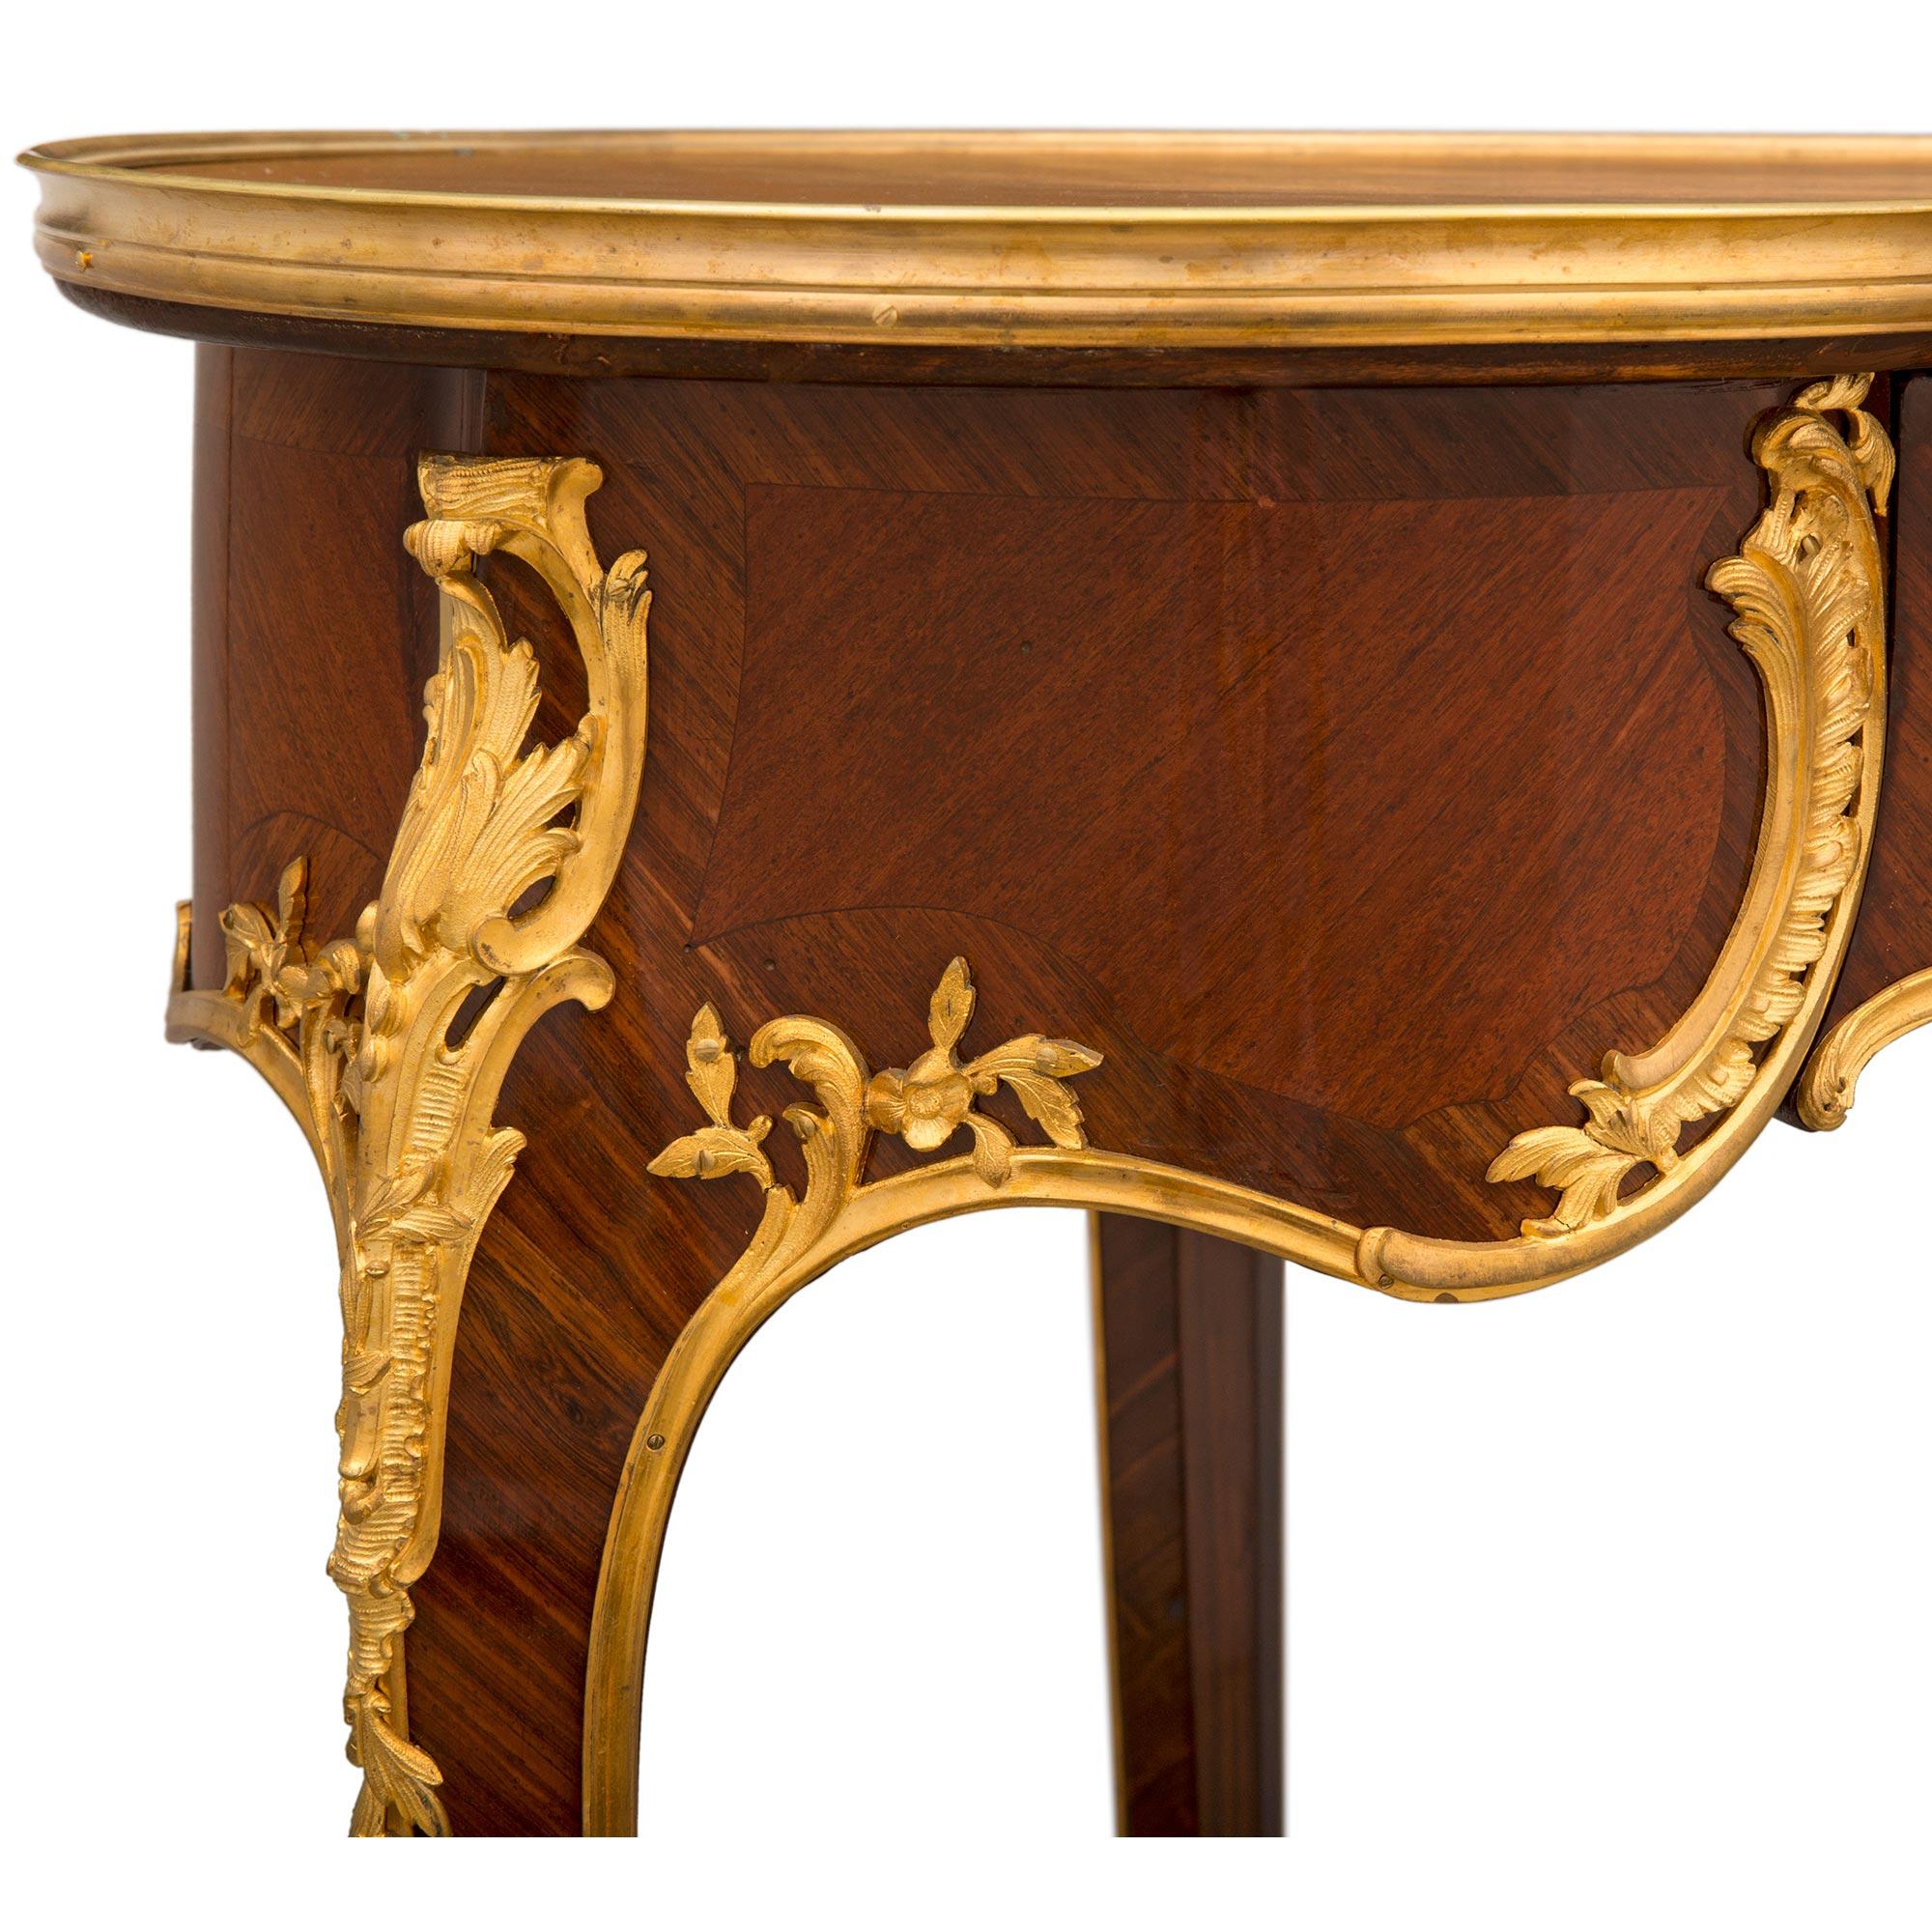 French 19th Century Louis XV Style Kingwood and Ormolu Desk, Attributed to Linke For Sale 4